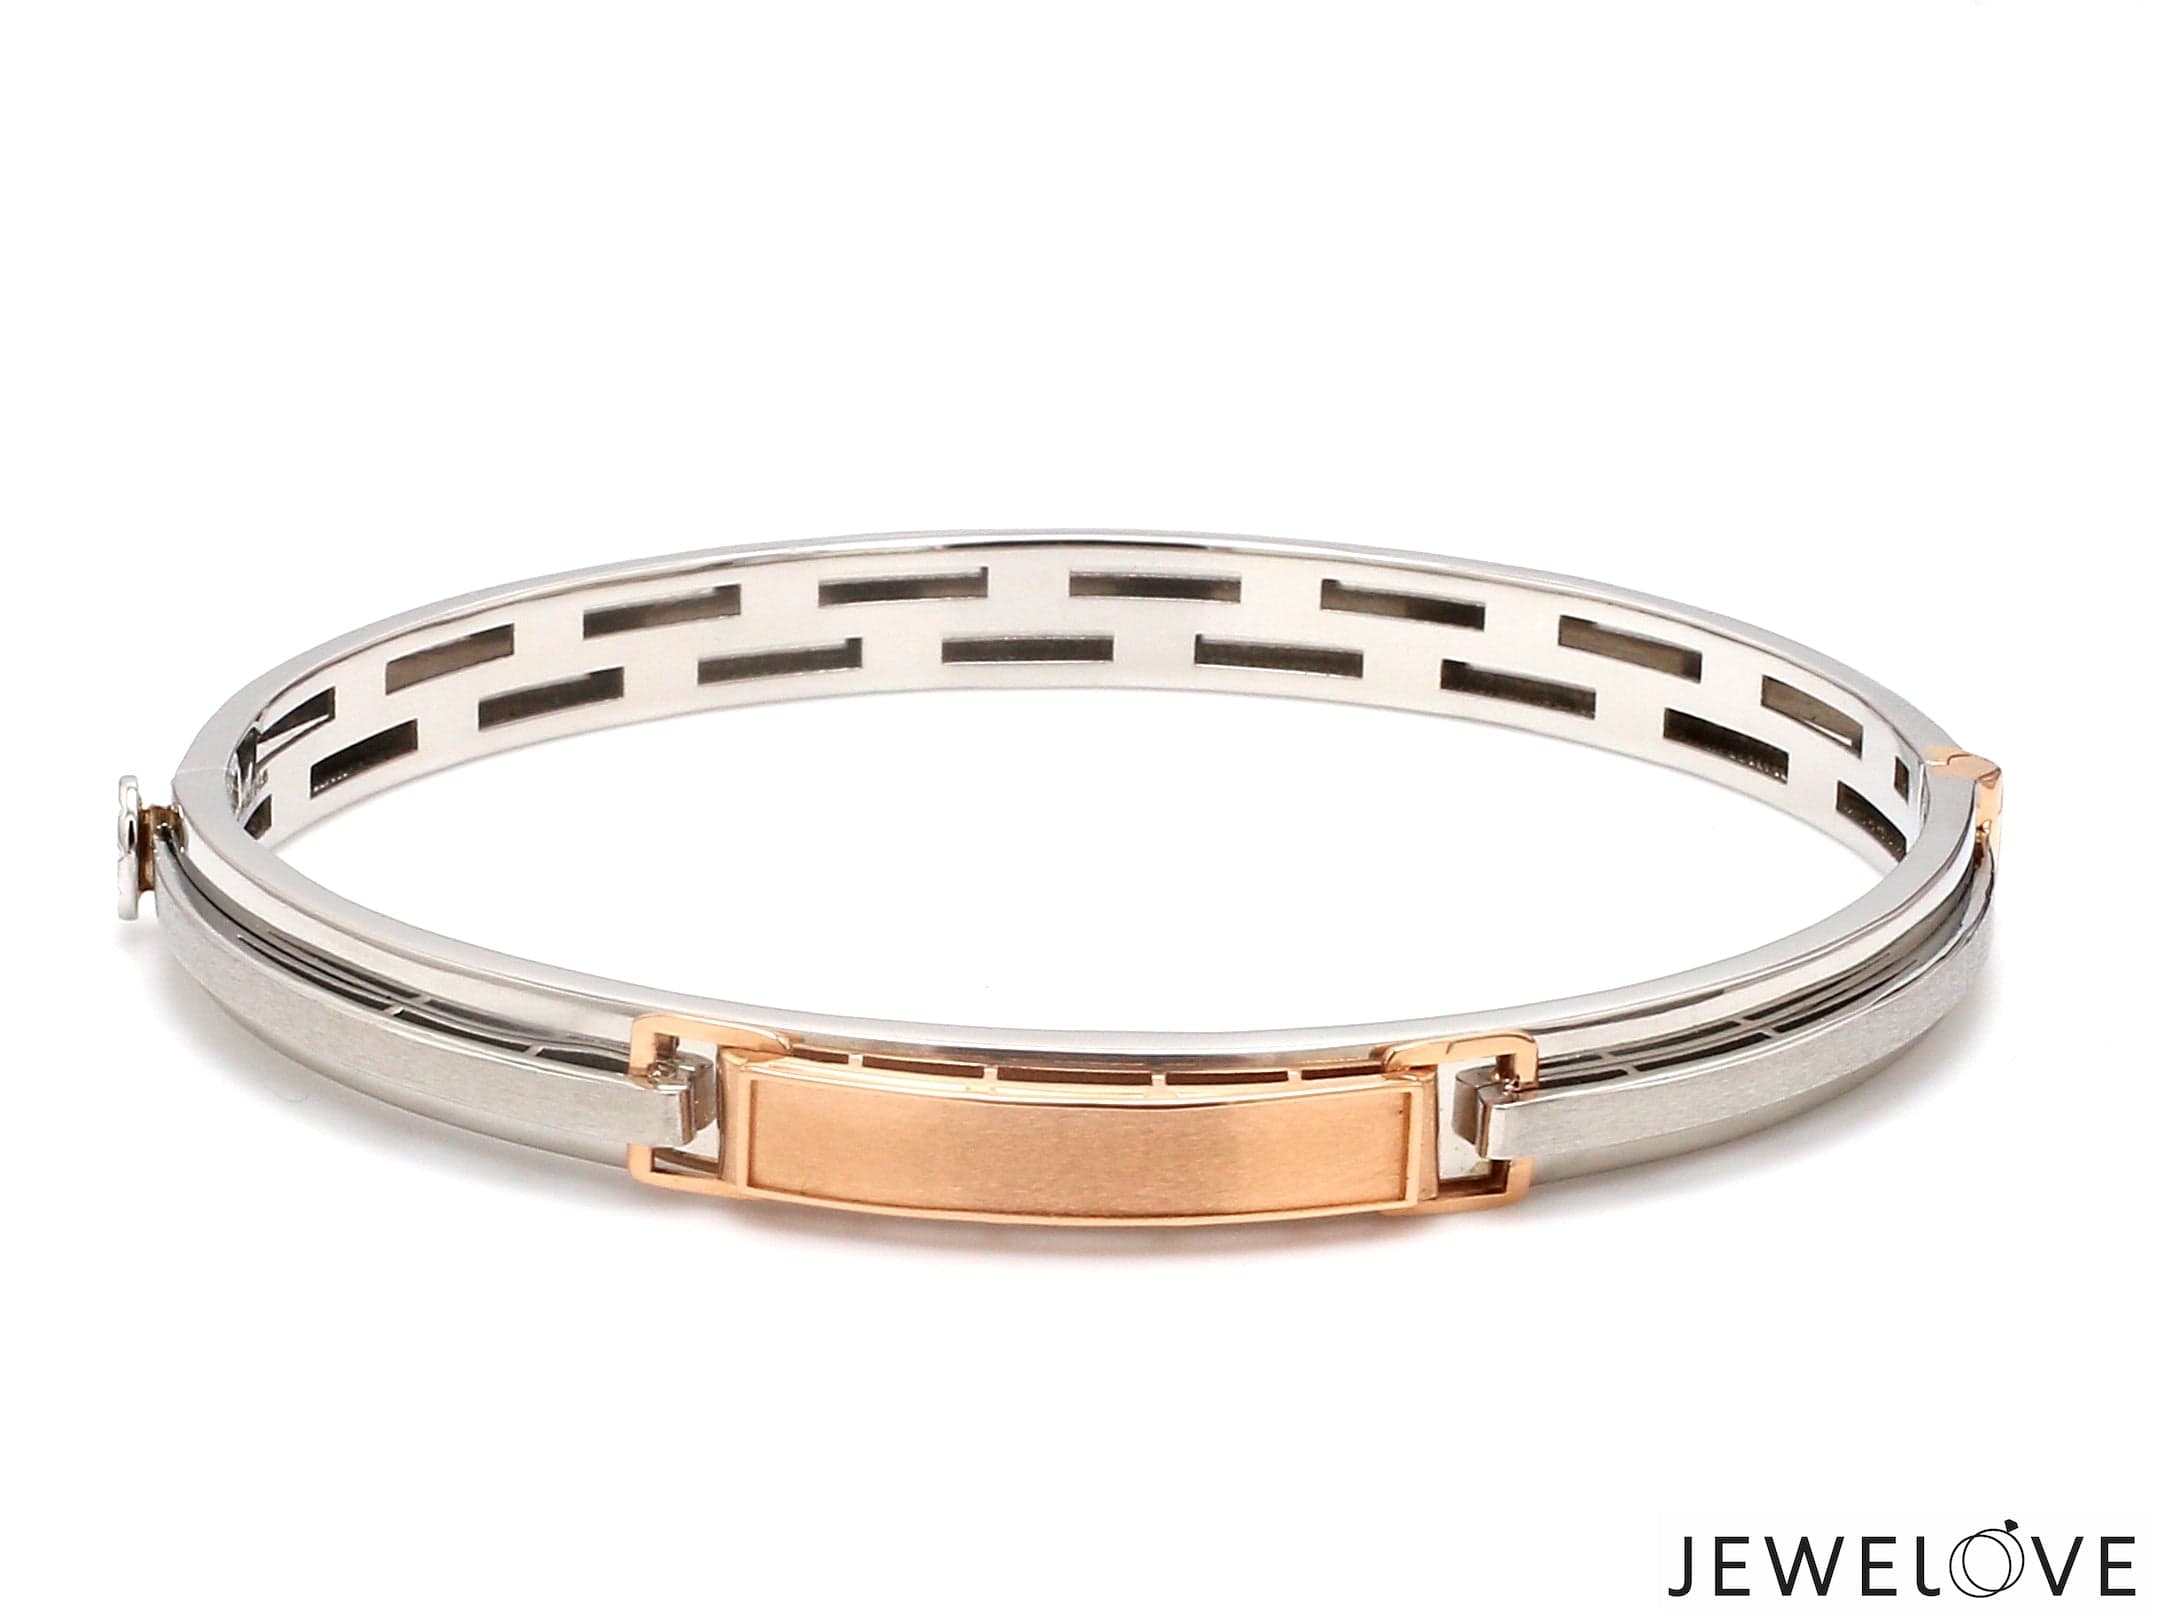 The History of the Iconic Cartier Love Bracelet | Diamond Banc